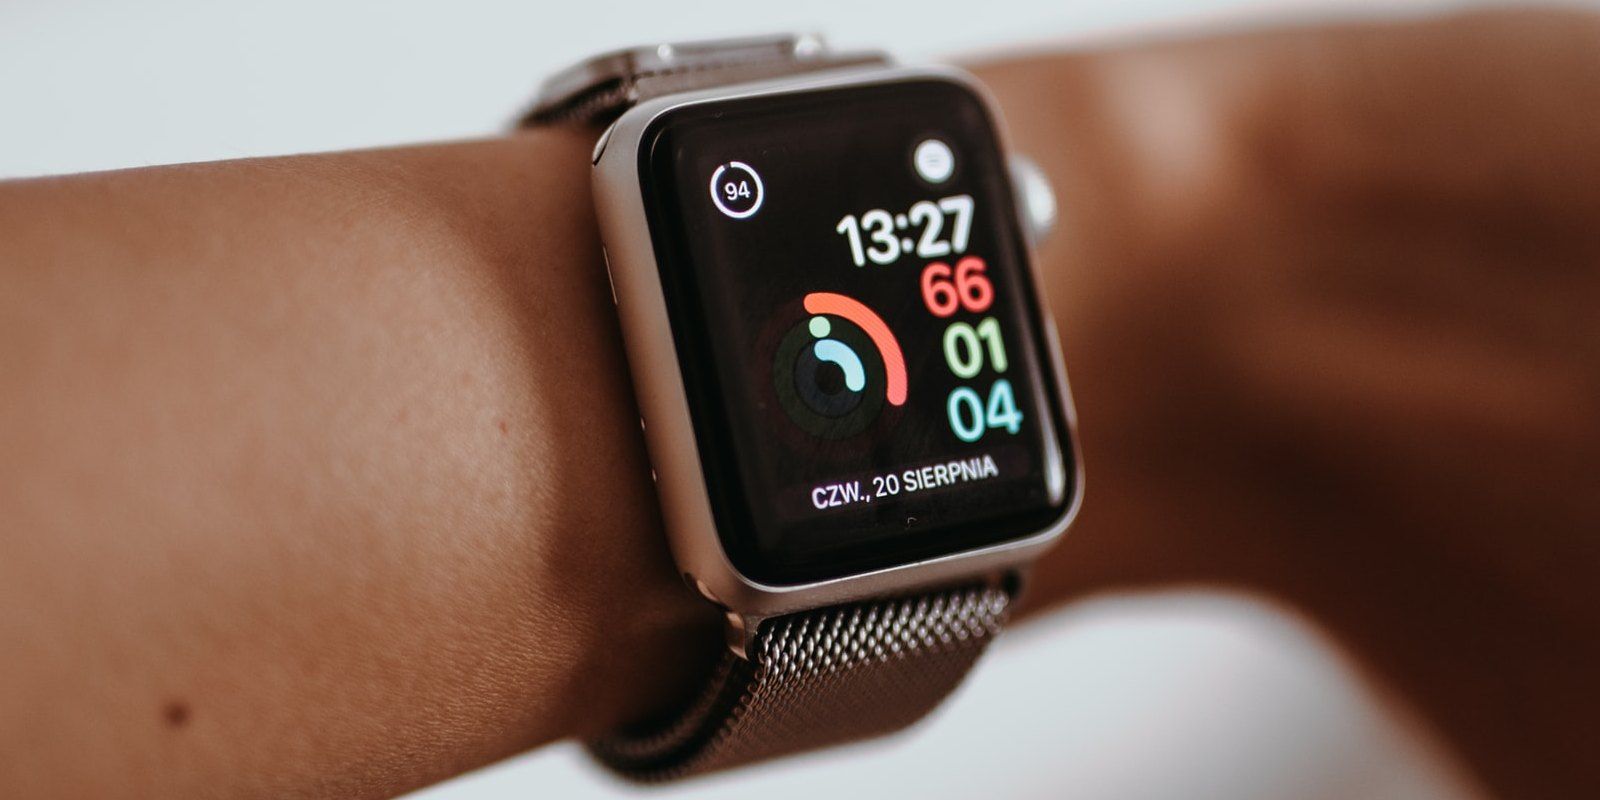 Apple Watch and Fitbit wearables found unreliable in study.